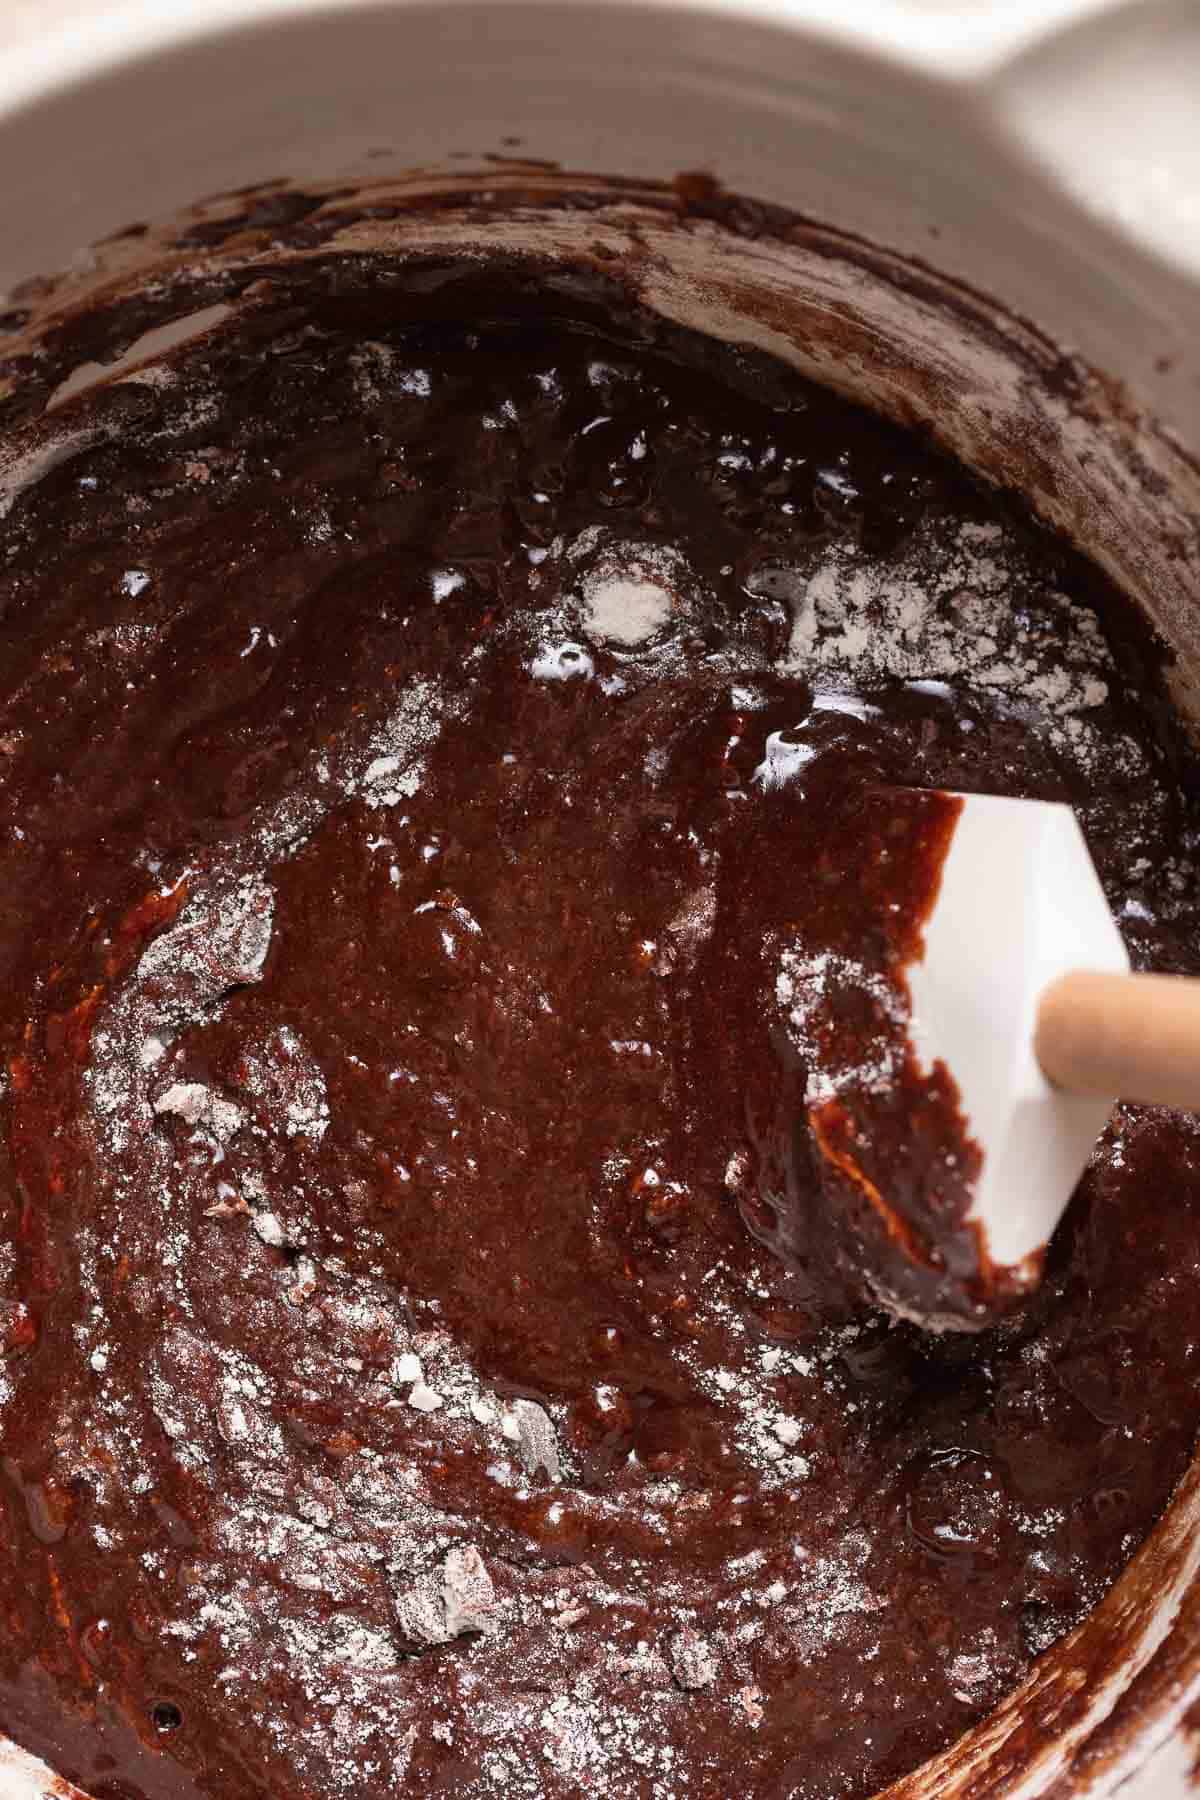 A mixing bowl of the brownie batter.